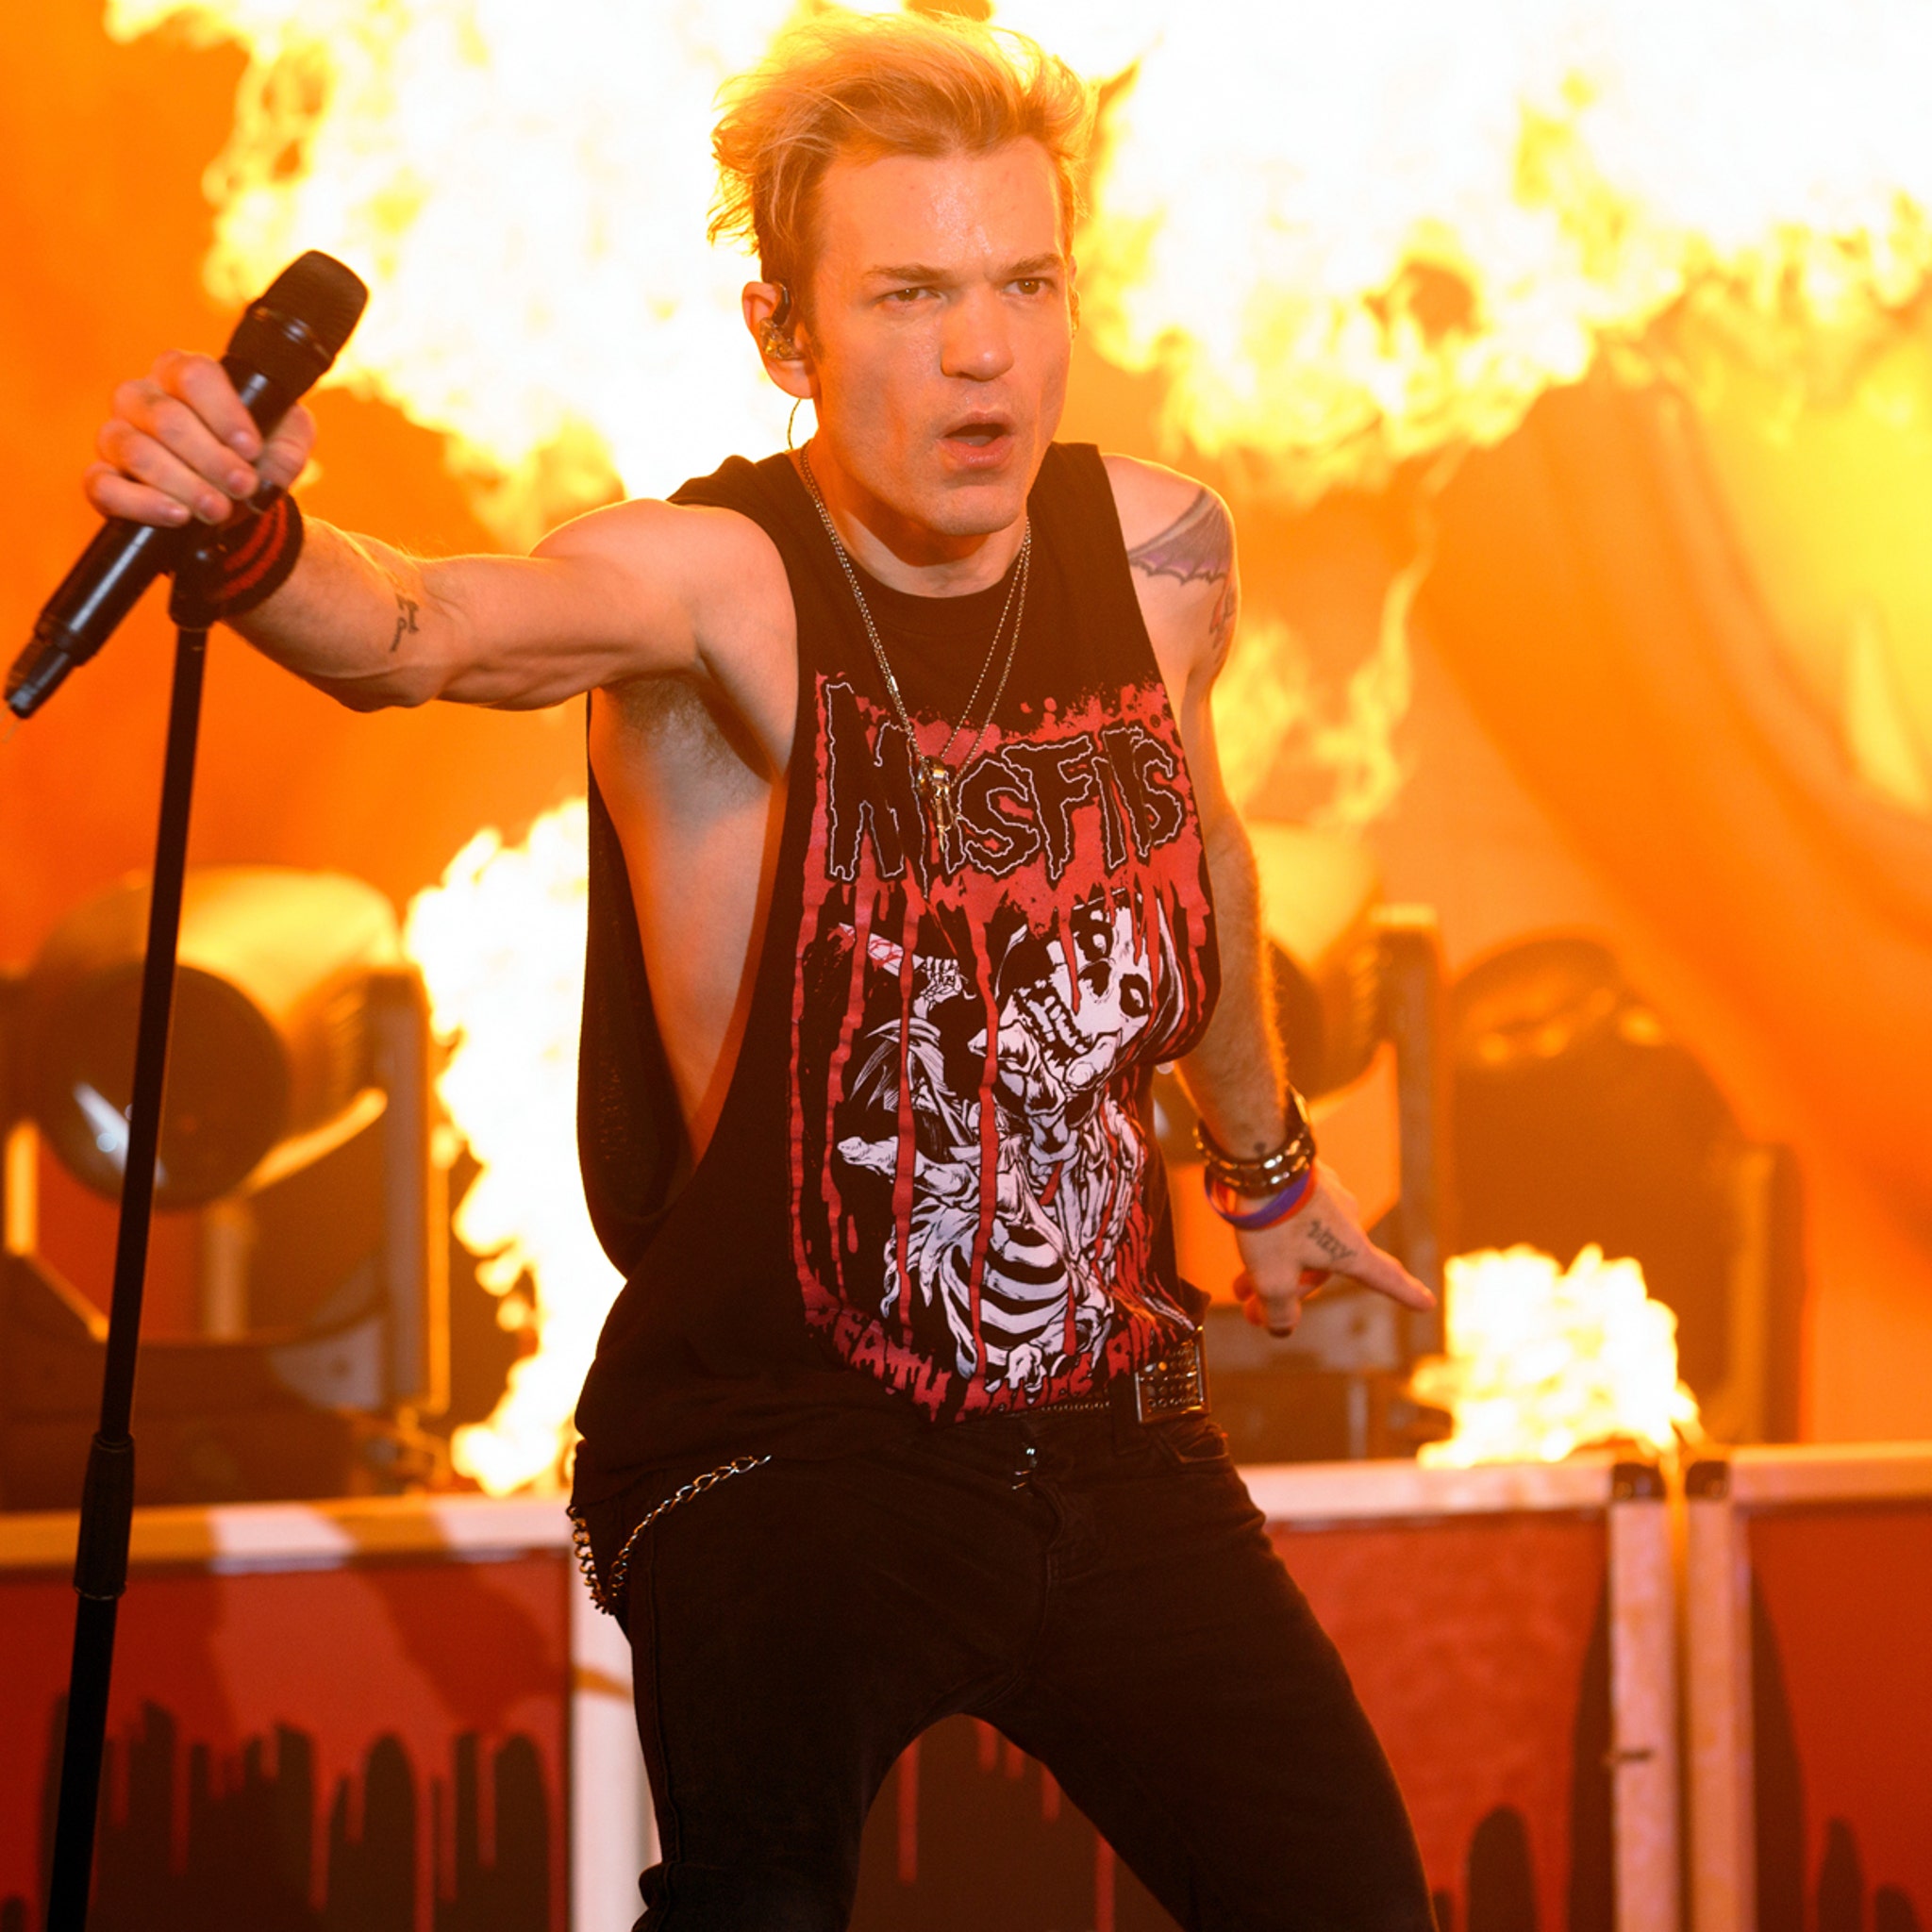 Sum 41 Split After 27 Years, Announce Farewell Tour and Album